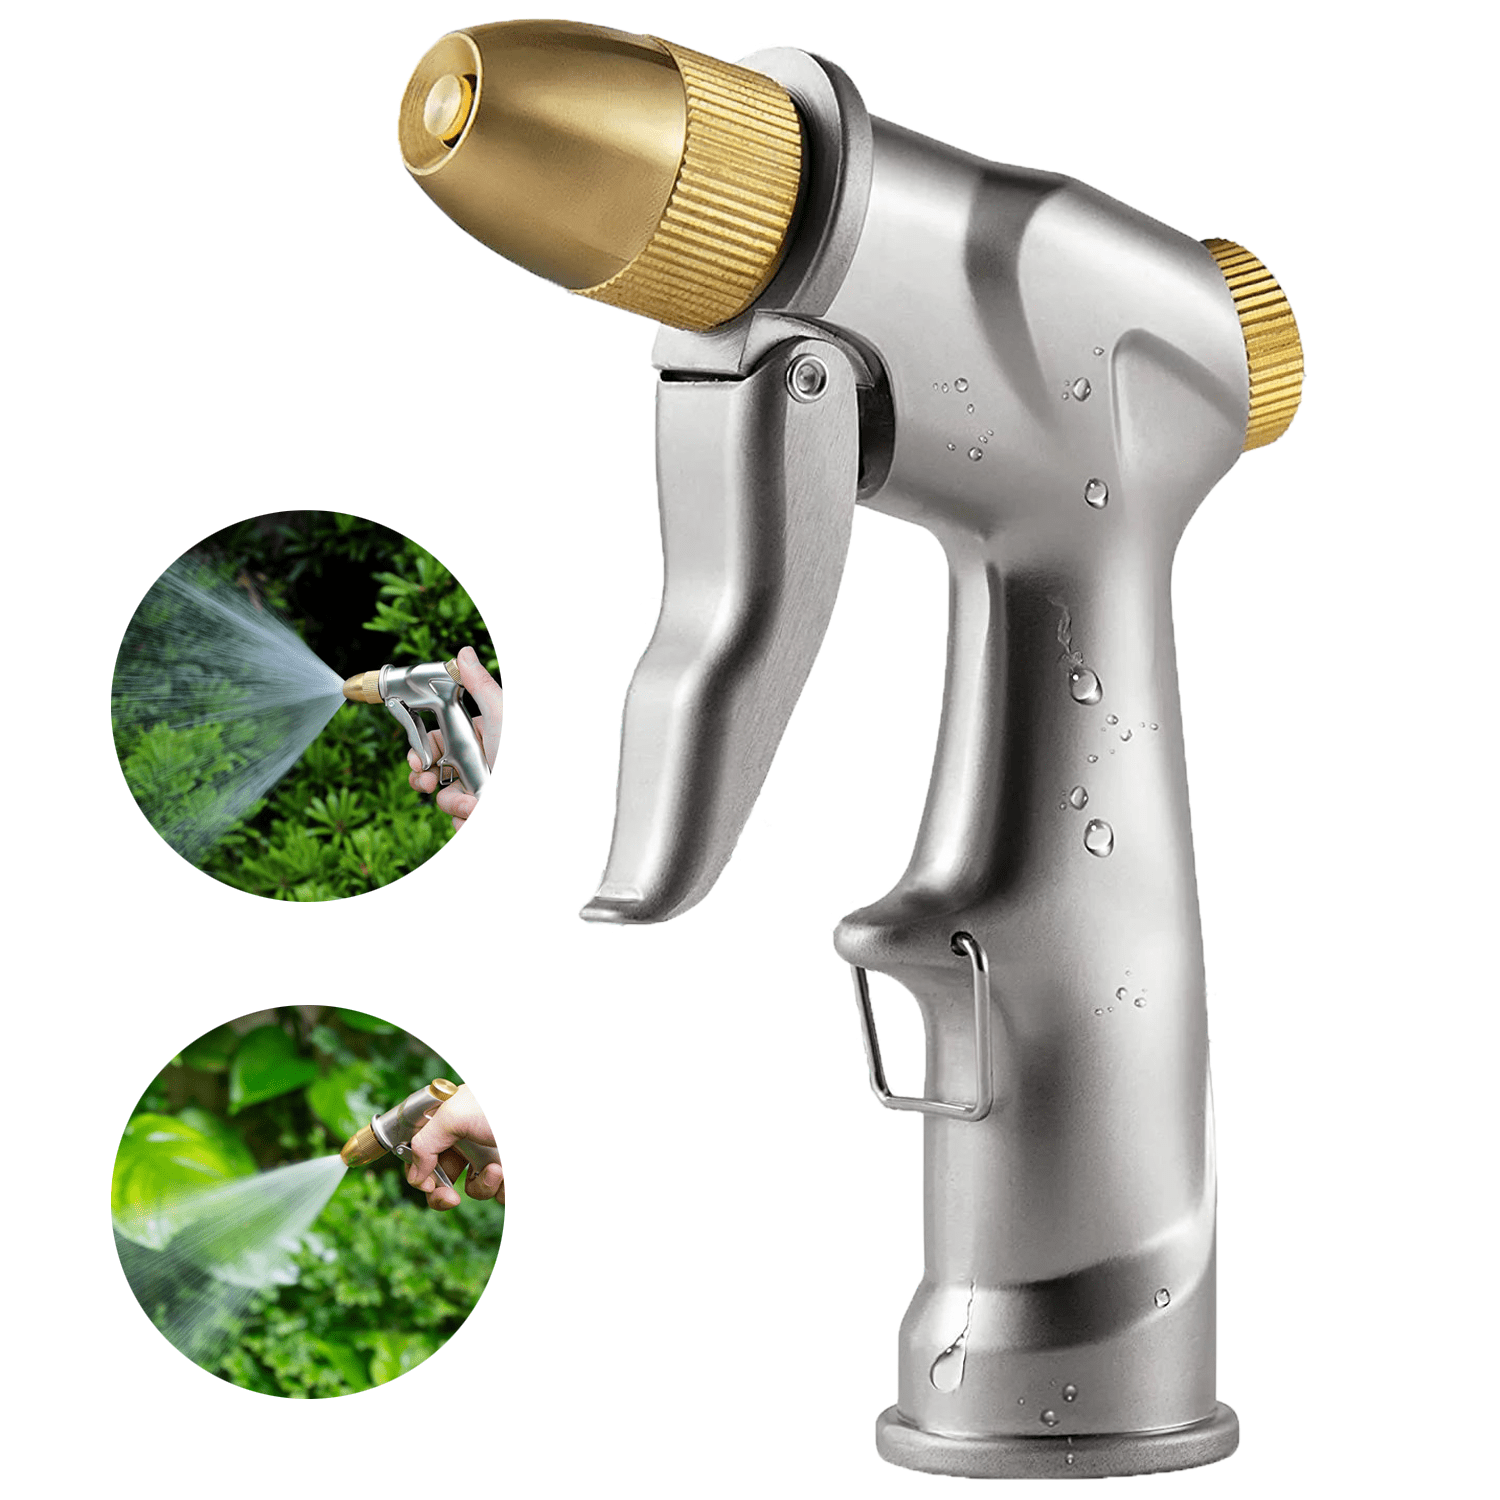 Garden Hose Nozzle Upgrade , Ricihene 100% Heavy Duty Metal Spray Gun with  Full Brass Nozzle - High Pressure 4 Spraying Modes for Hand Watering Plants